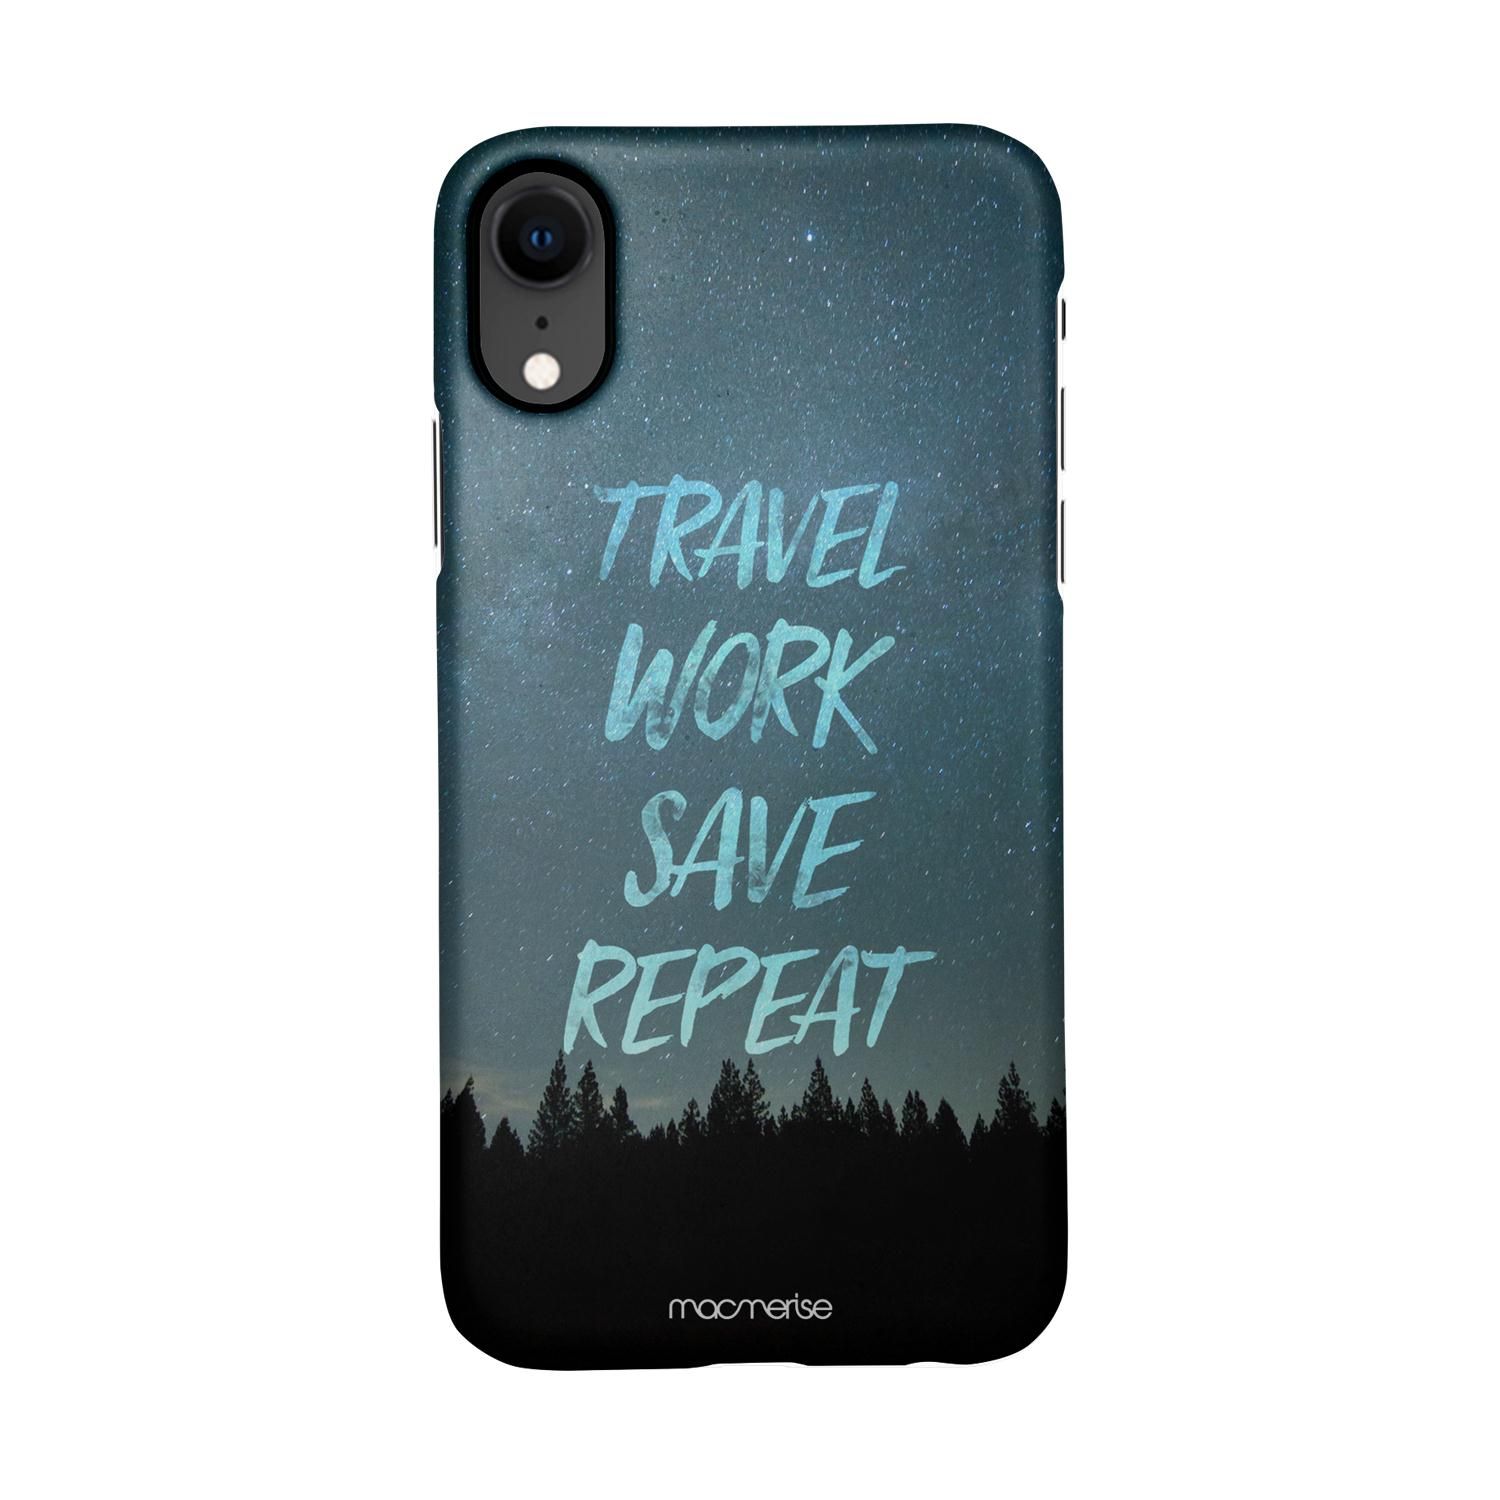 Buy Travel Work Save Repeat - Sleek Phone Case for iPhone XR Online